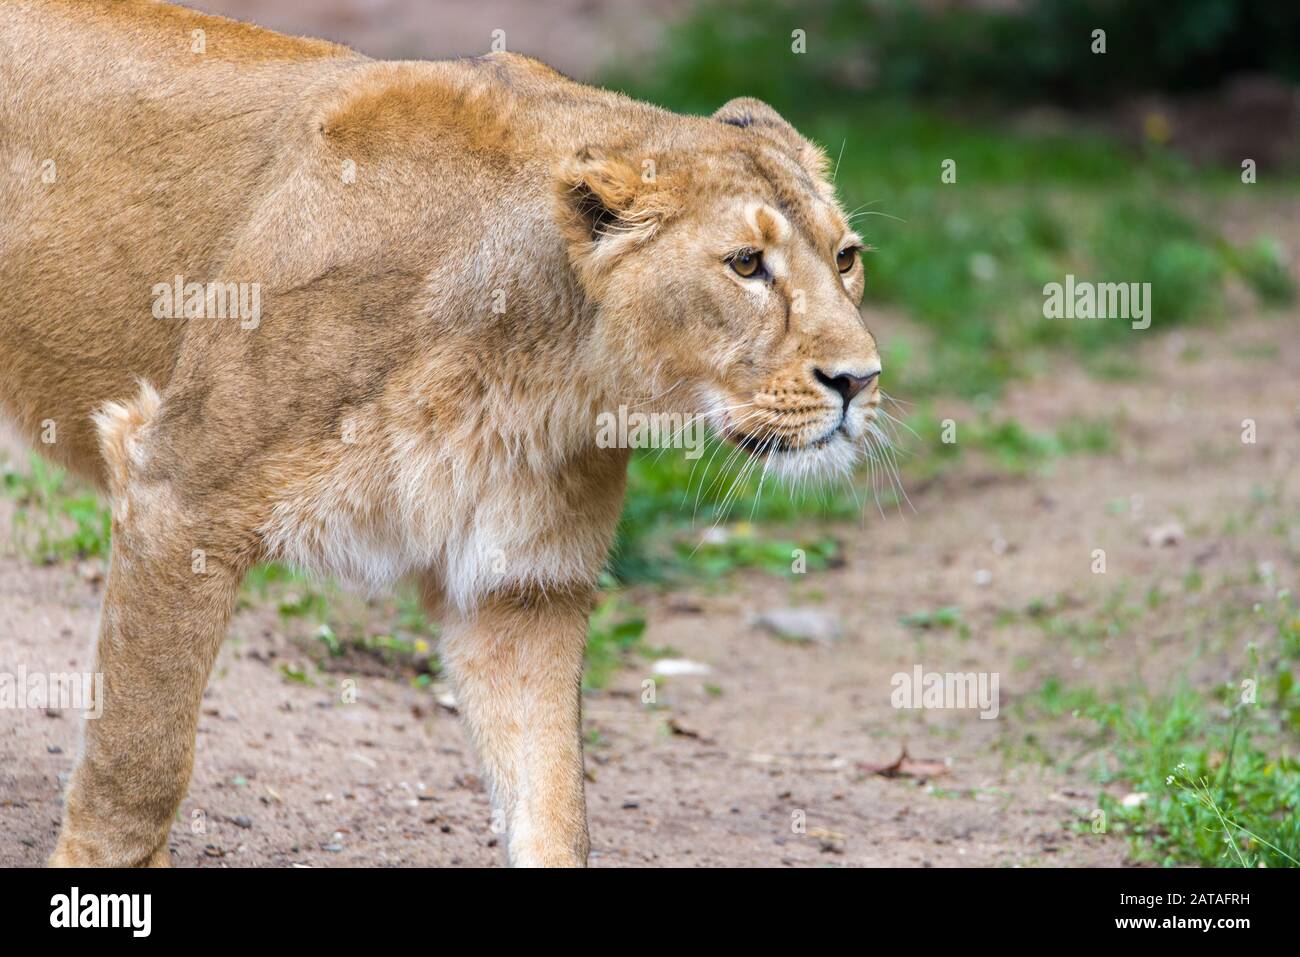 Female Lion, Panthera Leo, Lionesse Portrait. Image Of A Female African ...